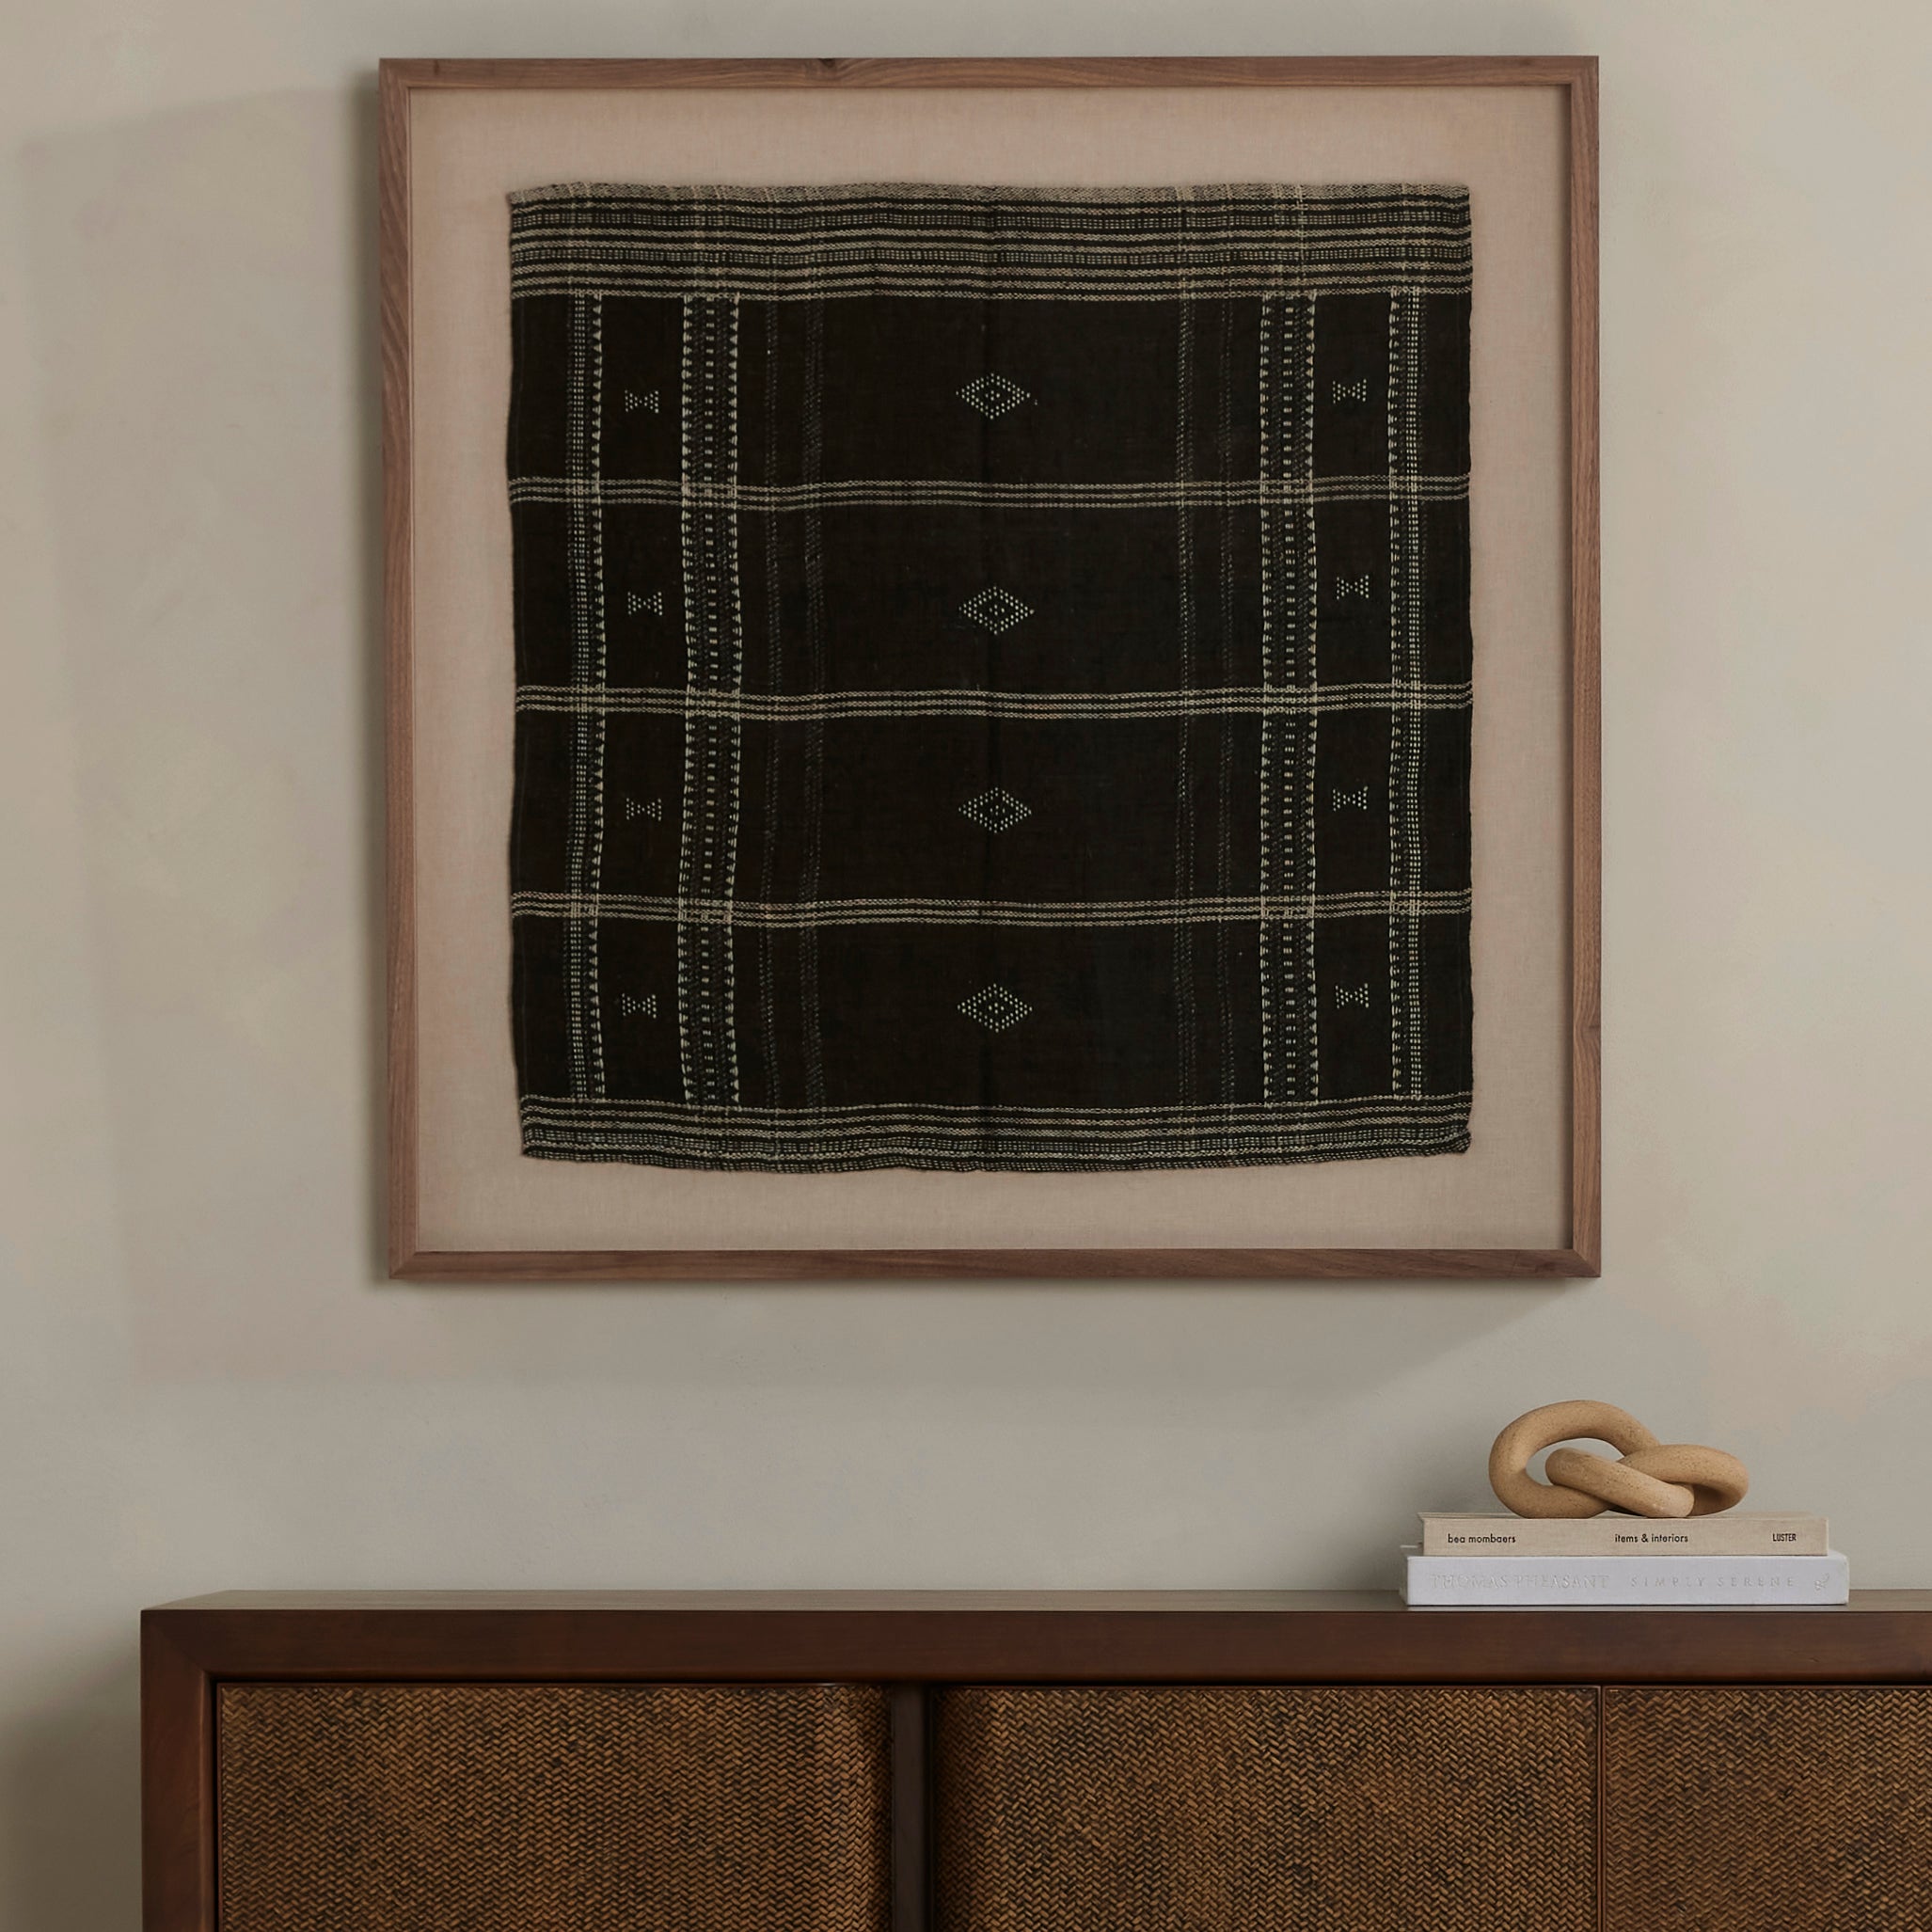 A 500-year-old tradition comes to life on this 100% wool, handwoven textile. Crafted on a traditional frame loom following a tradition created by the Vankars of the Bhujodi village in India, a process that can take up to two days to complete. Finished with fringe tassels on both ends. If not currently in stock, this piece ships within three weeks. Amethyst Home provides interior design, new home construction design consulting, vintage area rugs, and lighting in the Calabasas metro area.